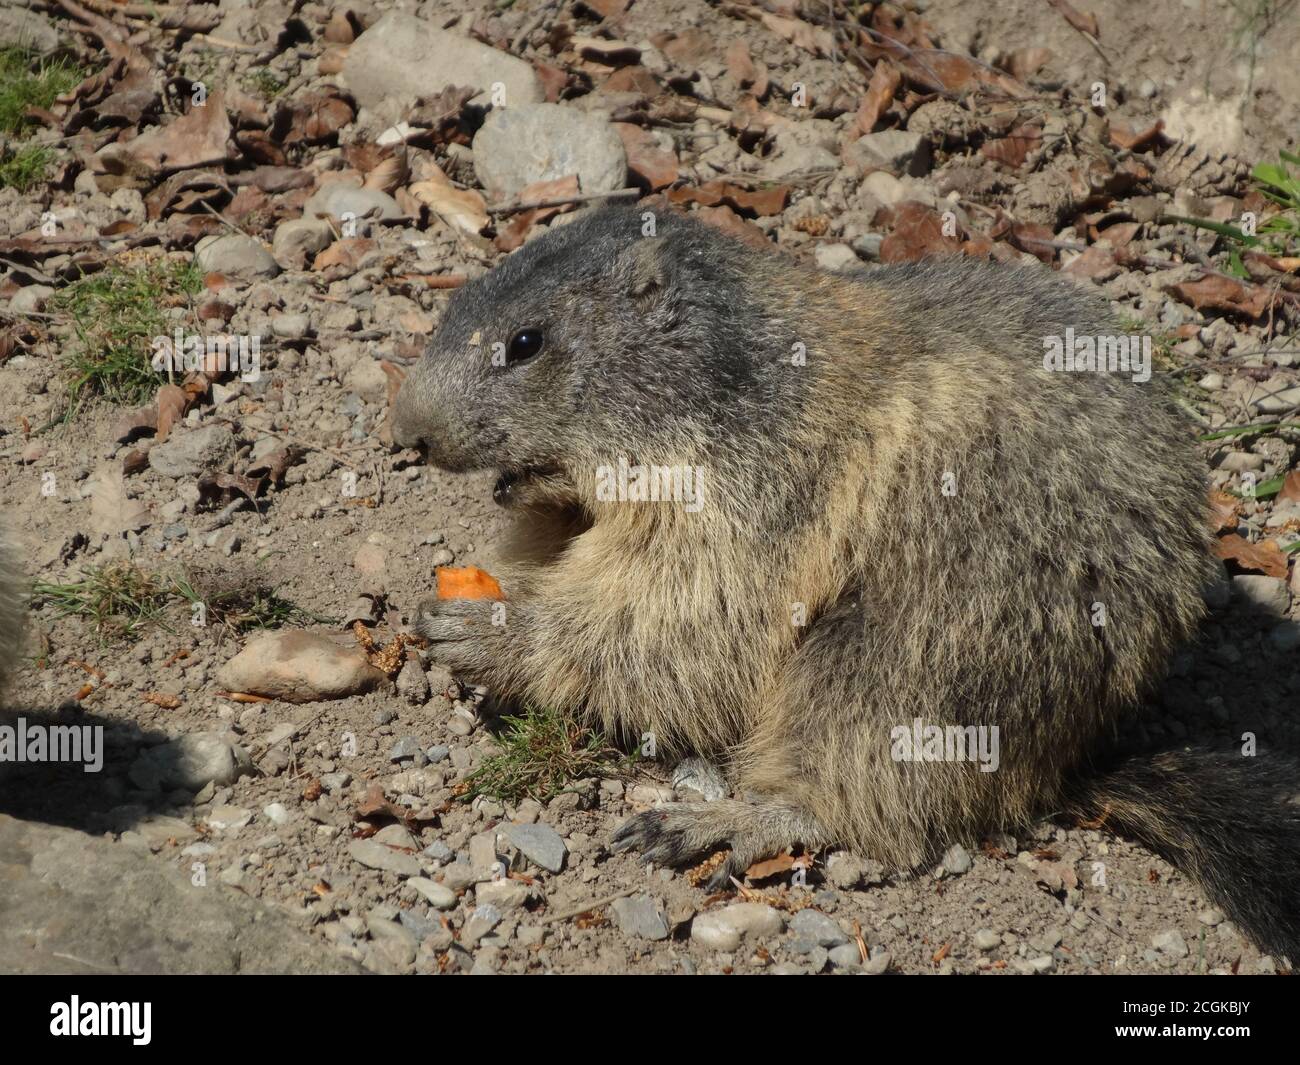 Cute marmot in a zoo or animal park nibbles at a carrot Stock Photo